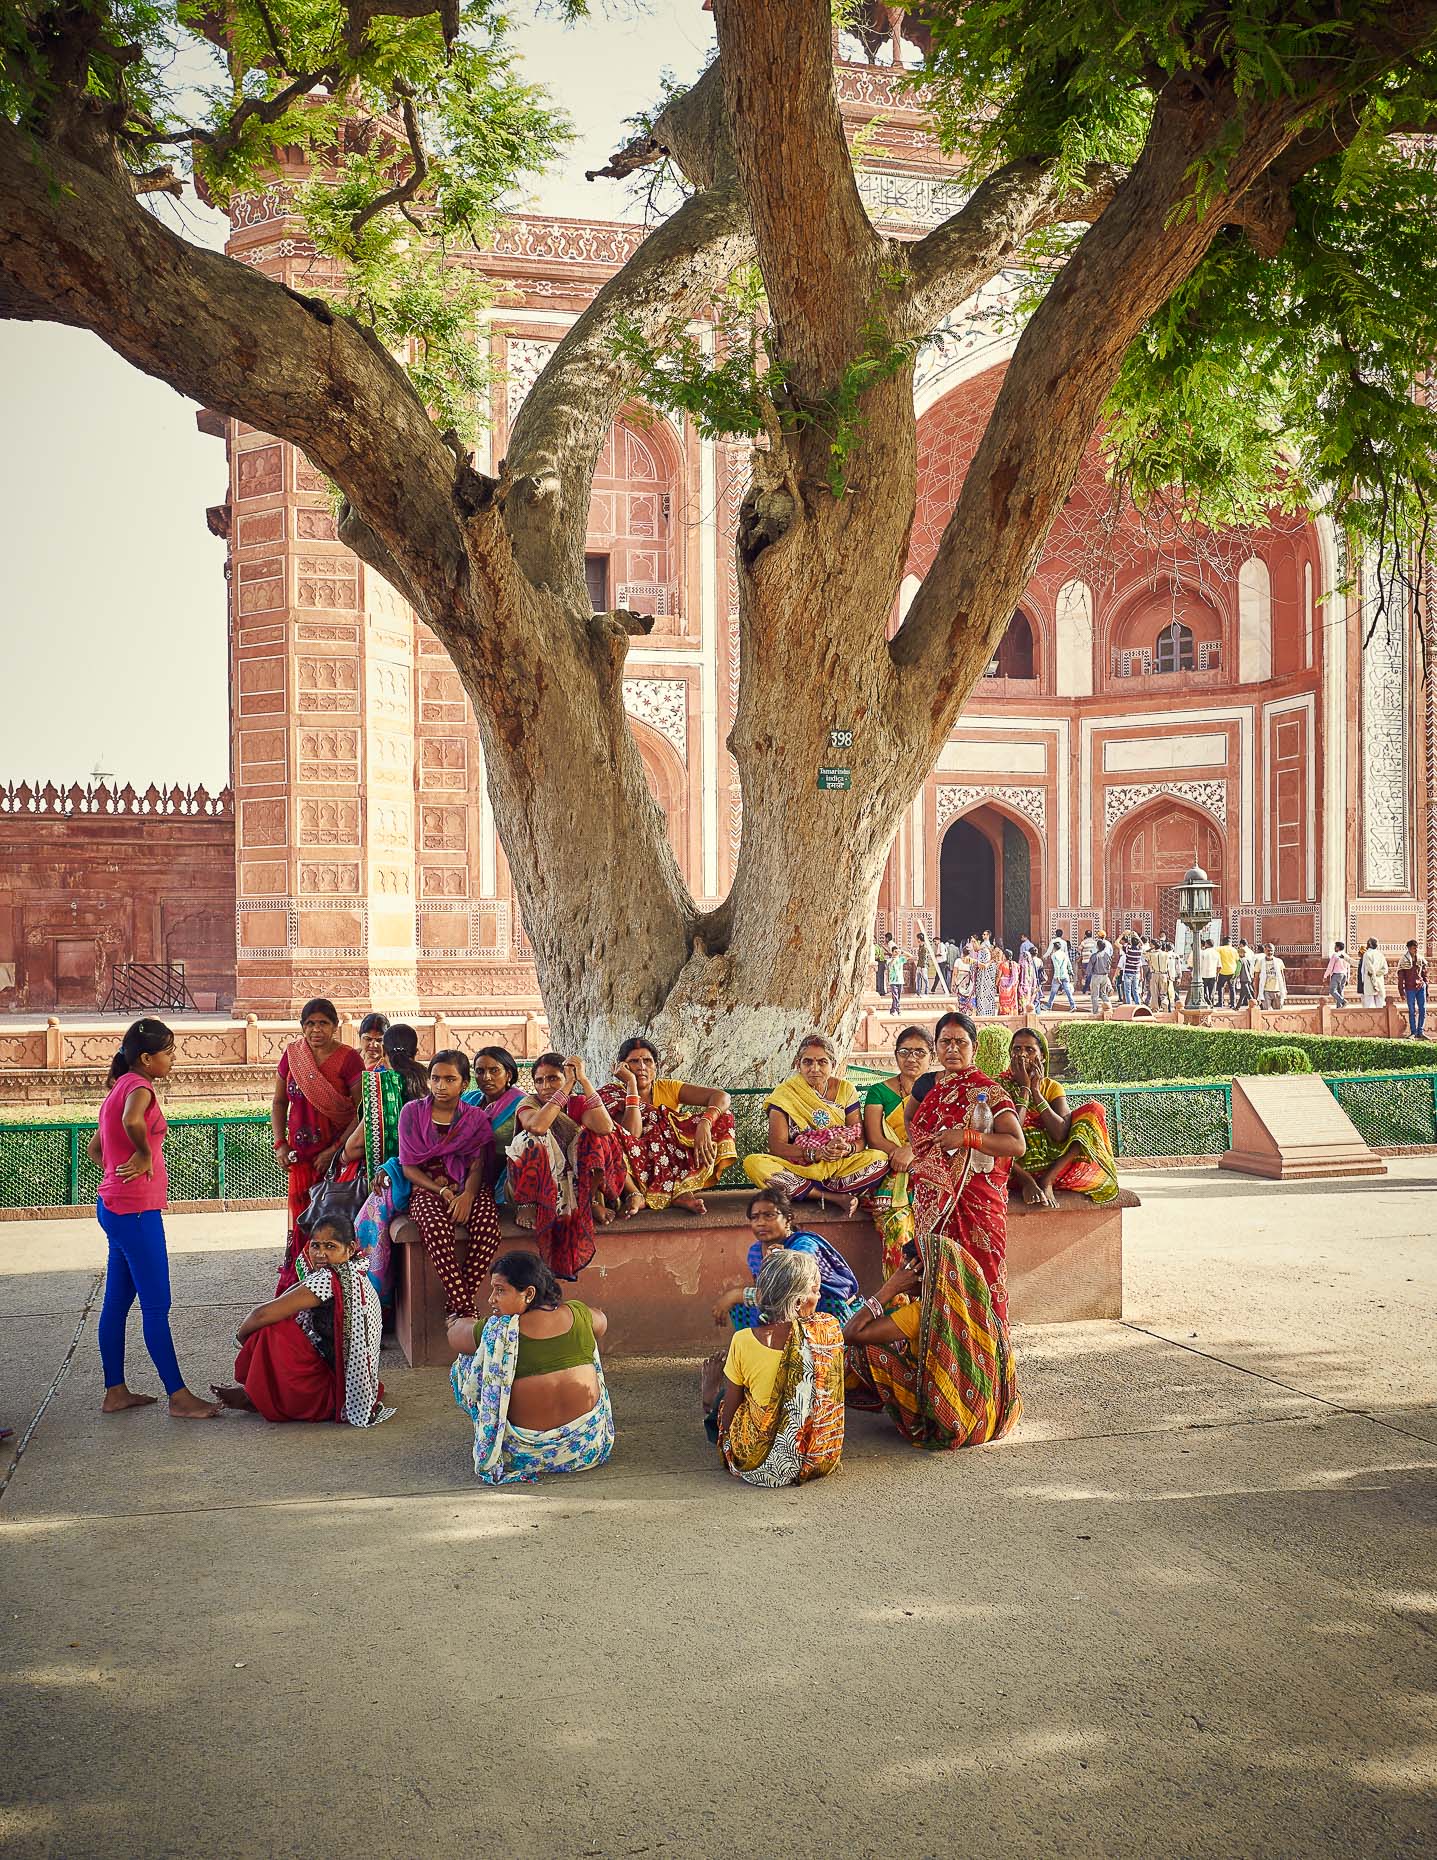 Personal_India_Agra_L10601331-31